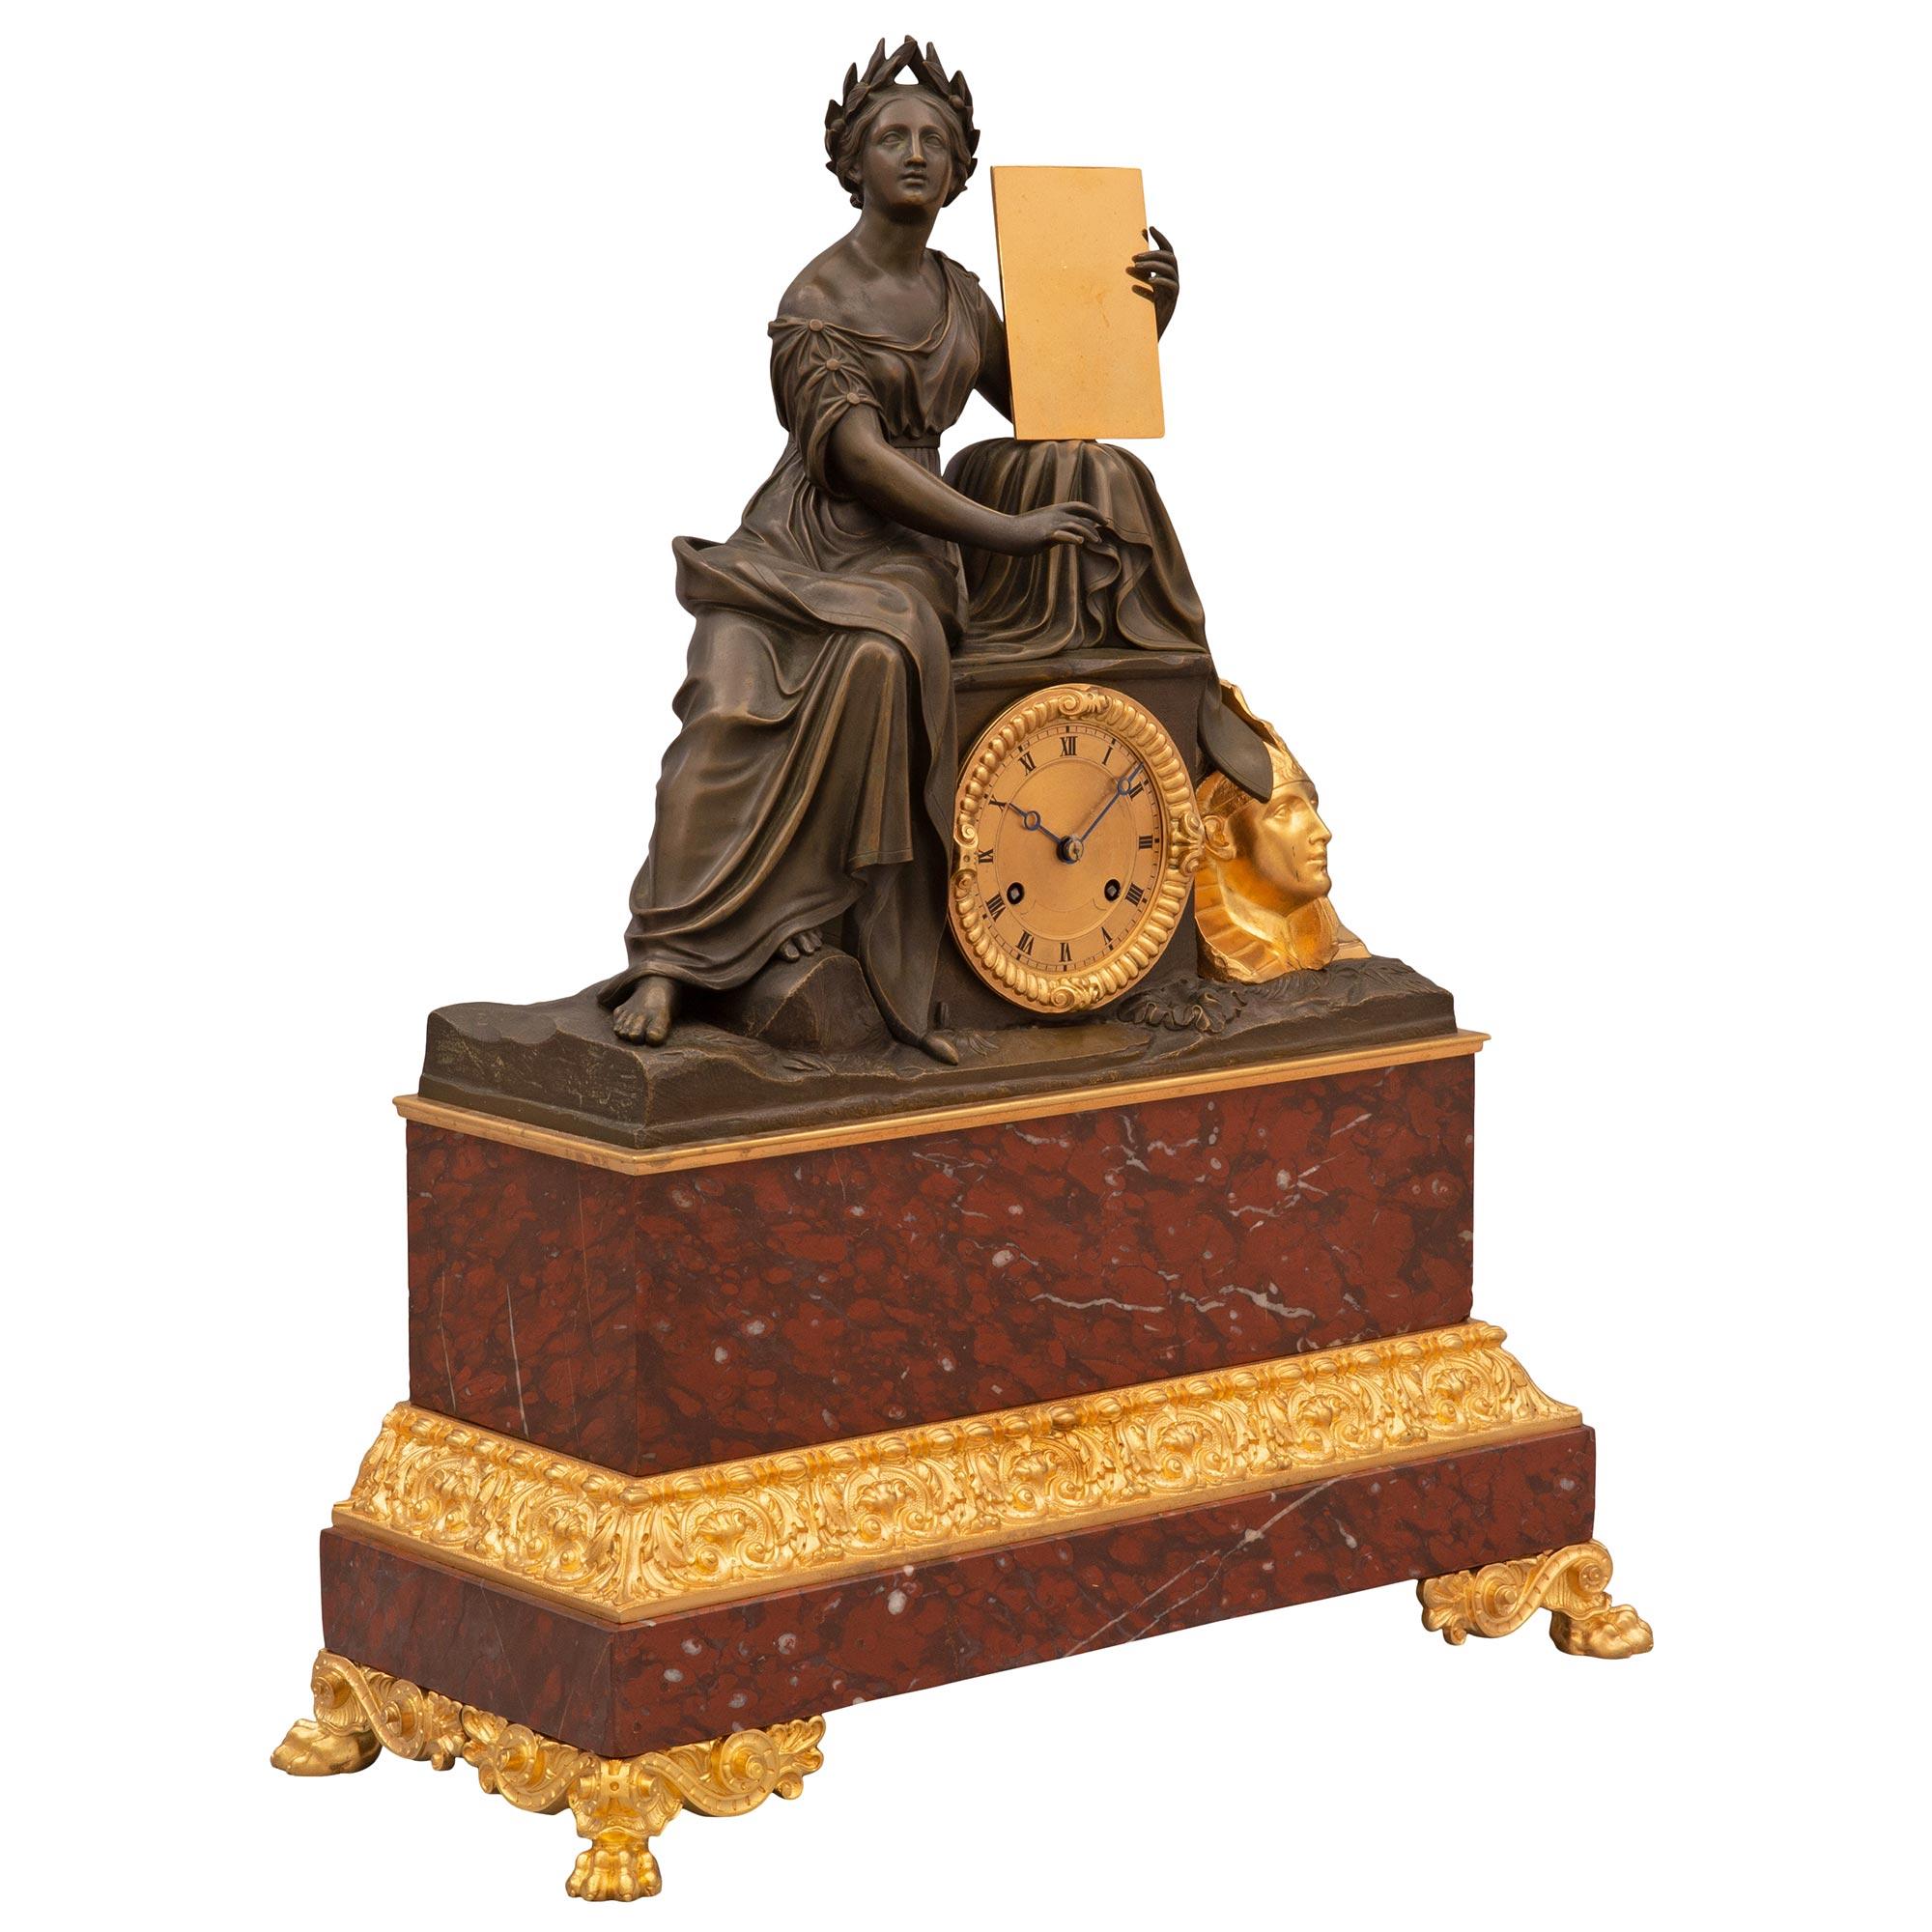 A striking and very high quality French 19th century Renaissance st. Rouge Griotte marble, patinated bronze, and ormolu garniture clock set. The clock at the center is raised by handsome lions paw feet amidst fine scrolled movements. The rectangular